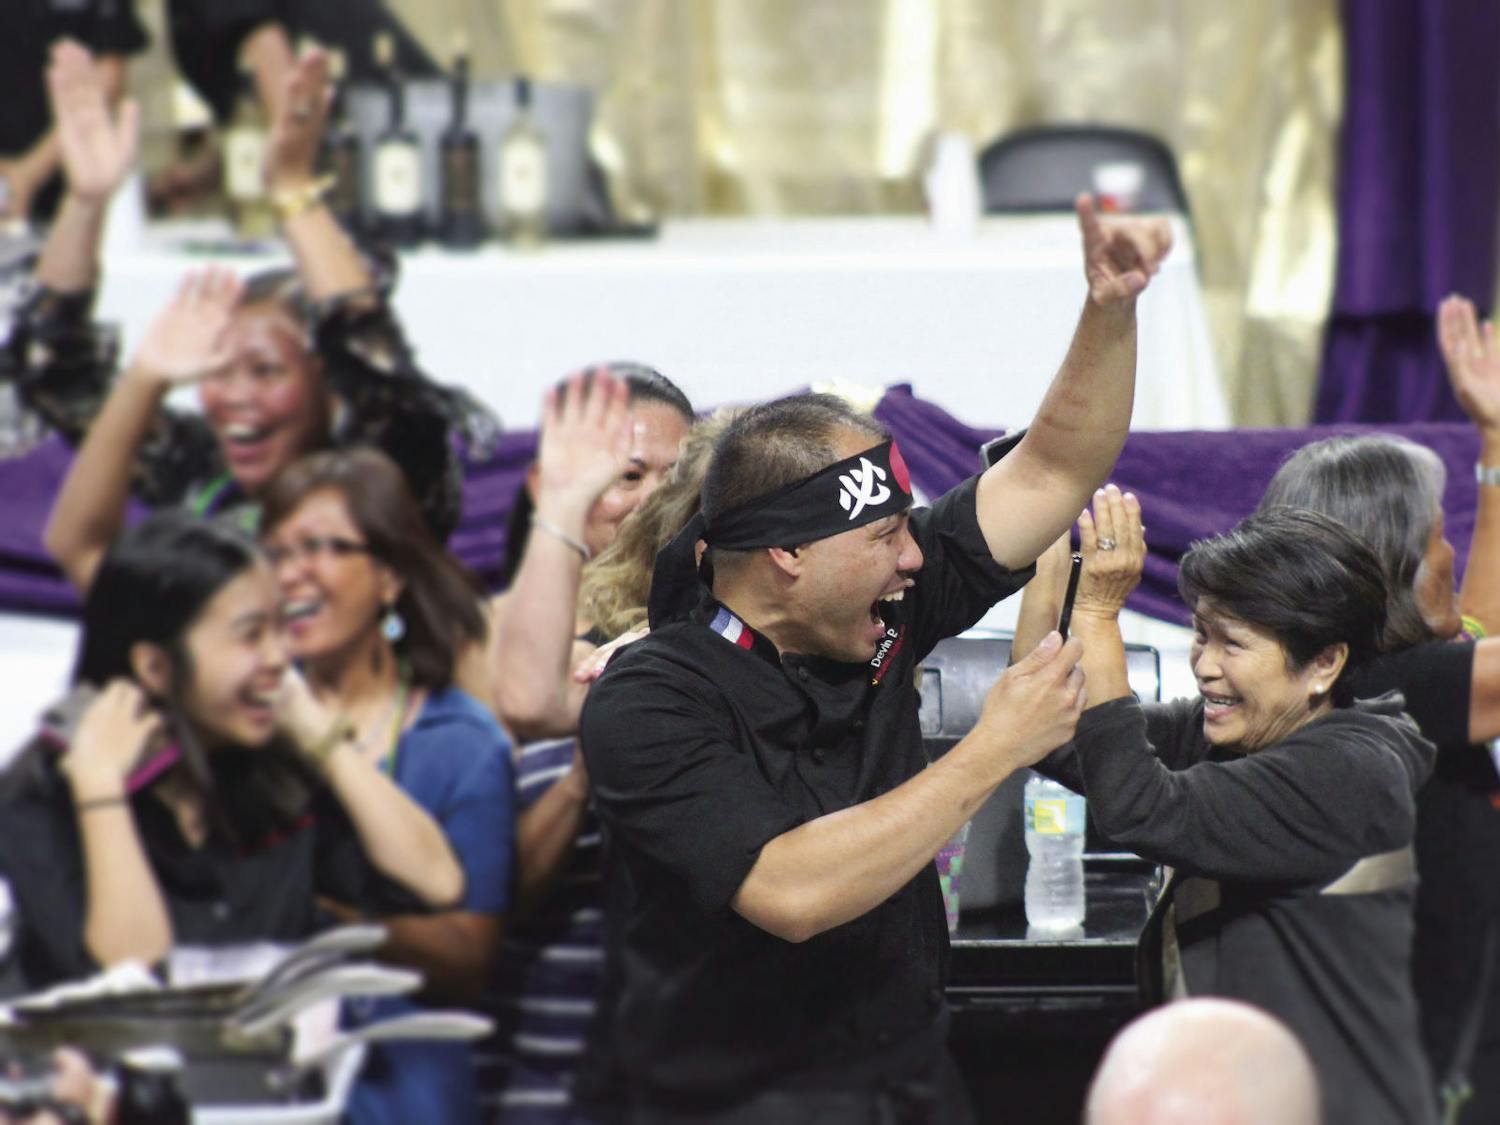 Chef Nester Espartero of Volcanic Sushi + Sake celebrates his team's Iron Chef victory at Tastes of Greater Gainesville 2018.